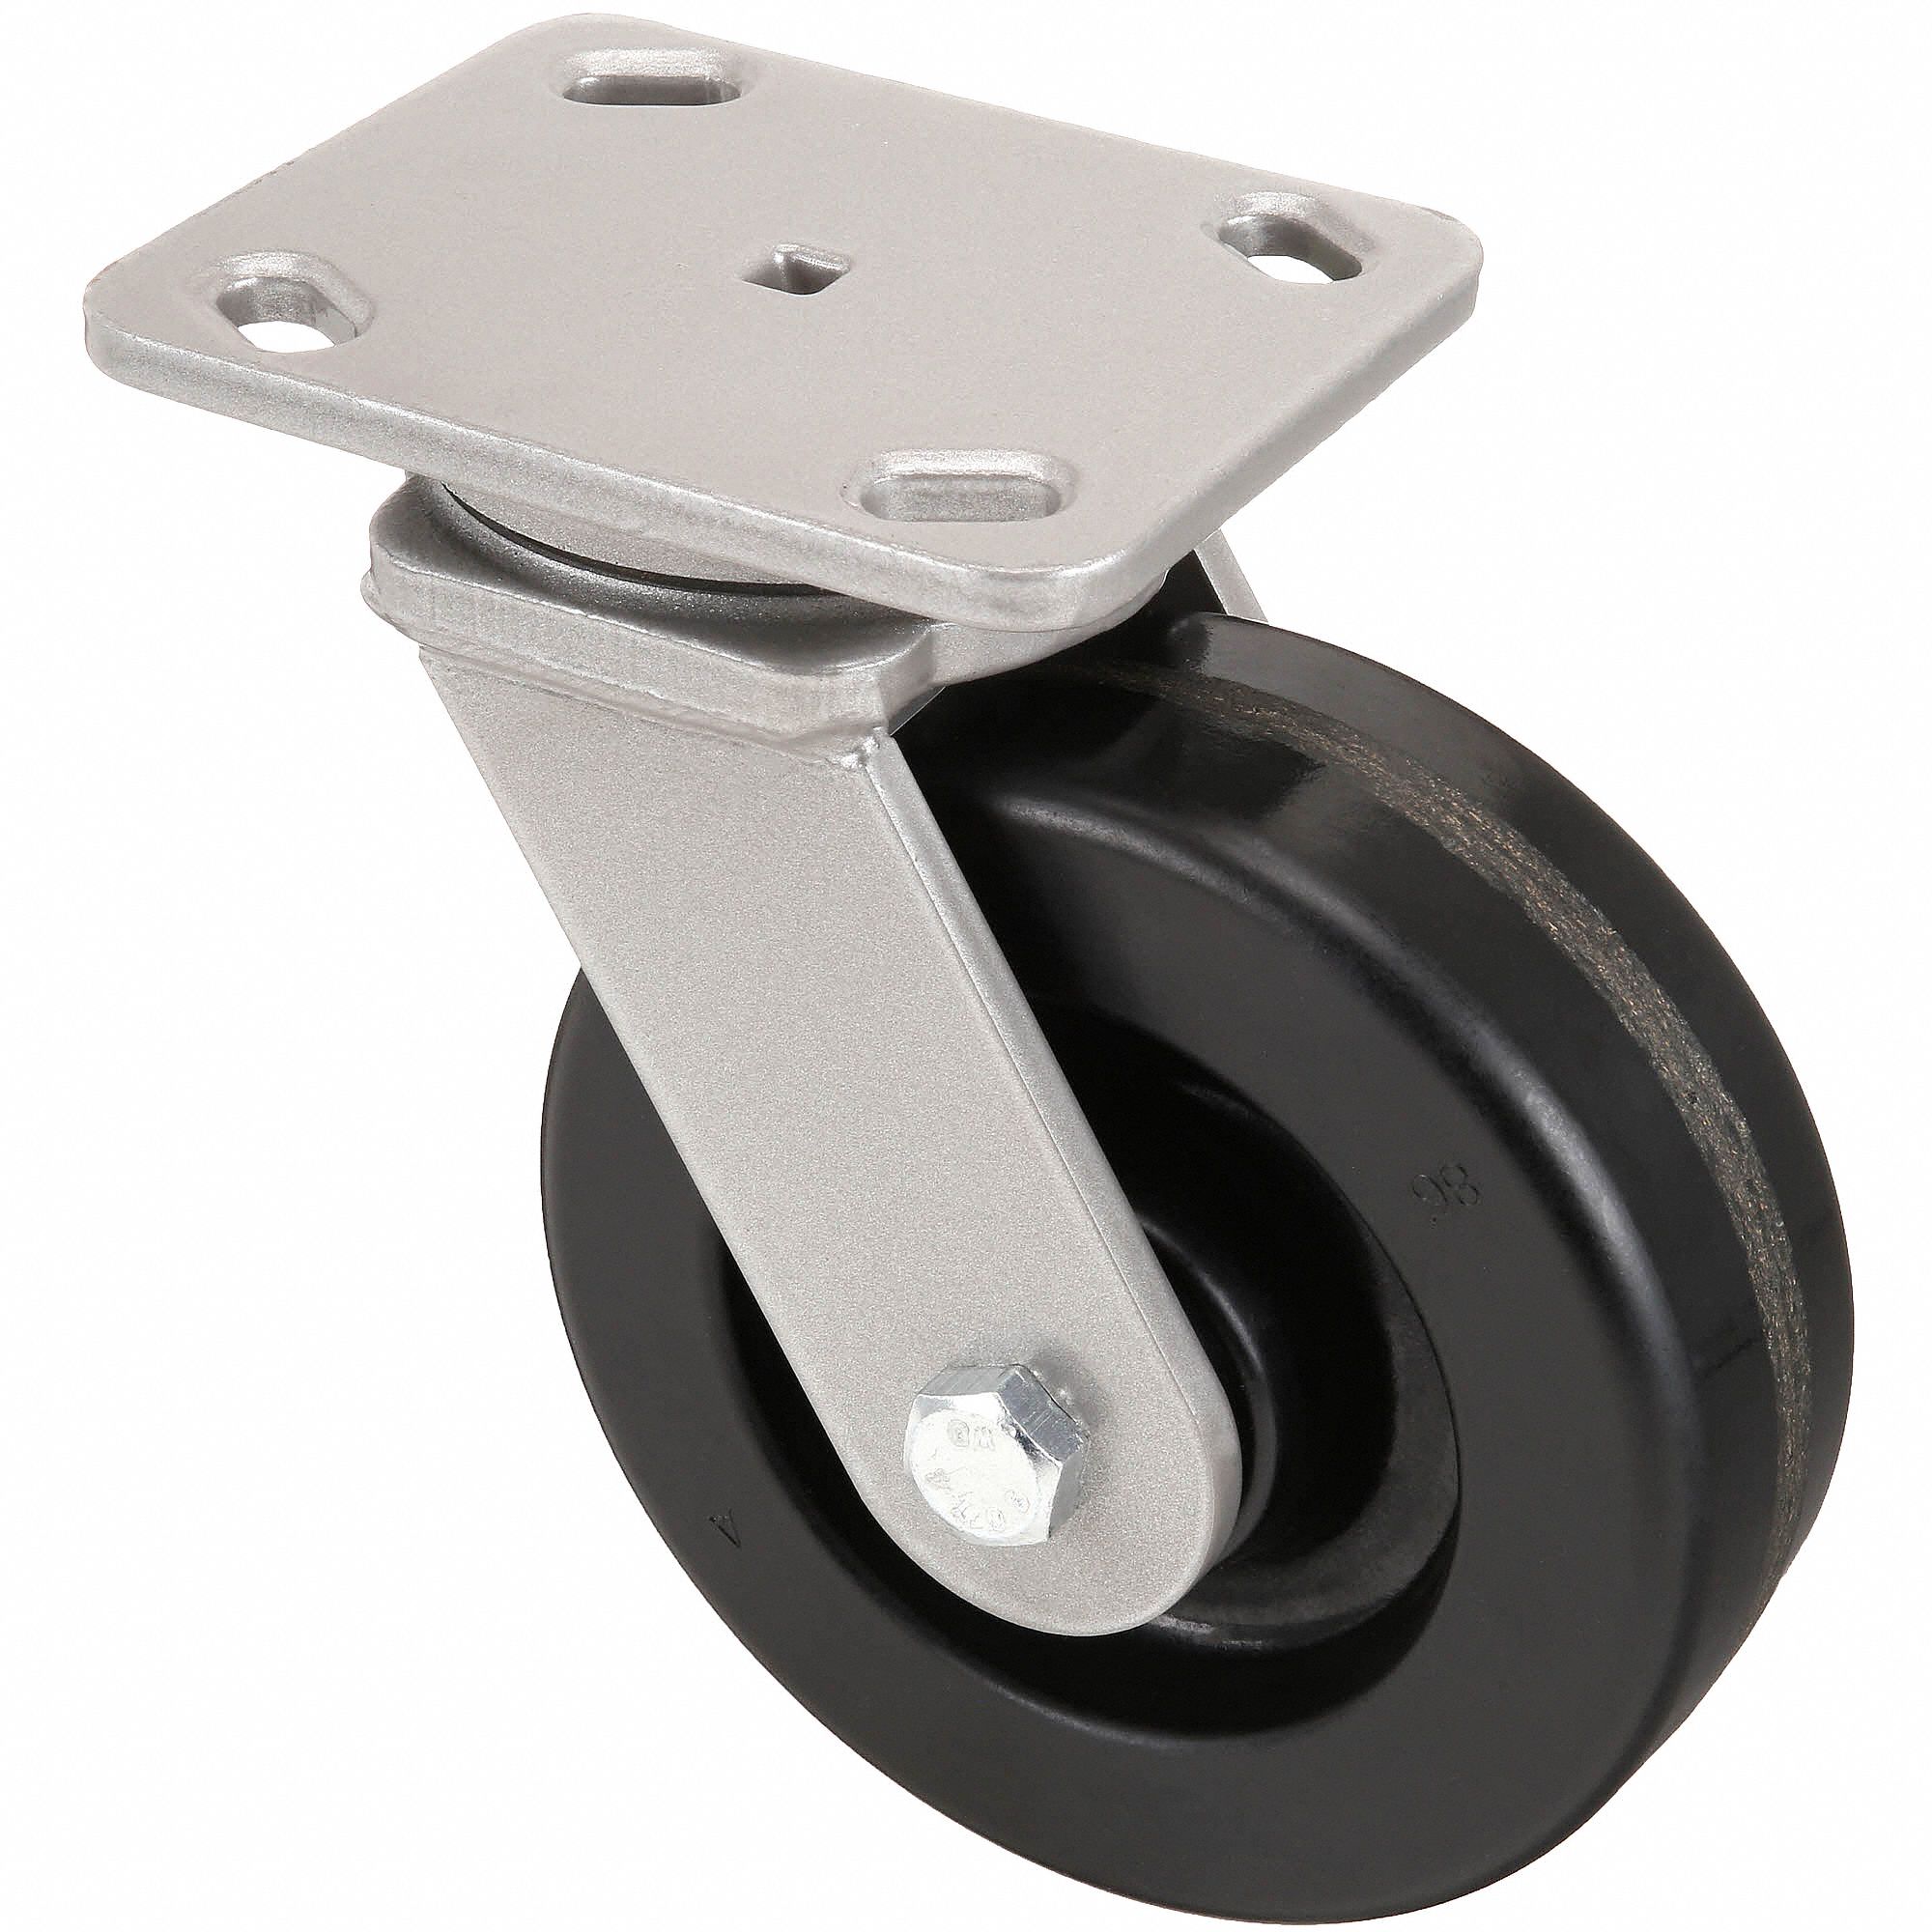 ZORO SELECT 1NWL4 Swivel Plate Caster,Cst Irn,5 in,1000 lb 